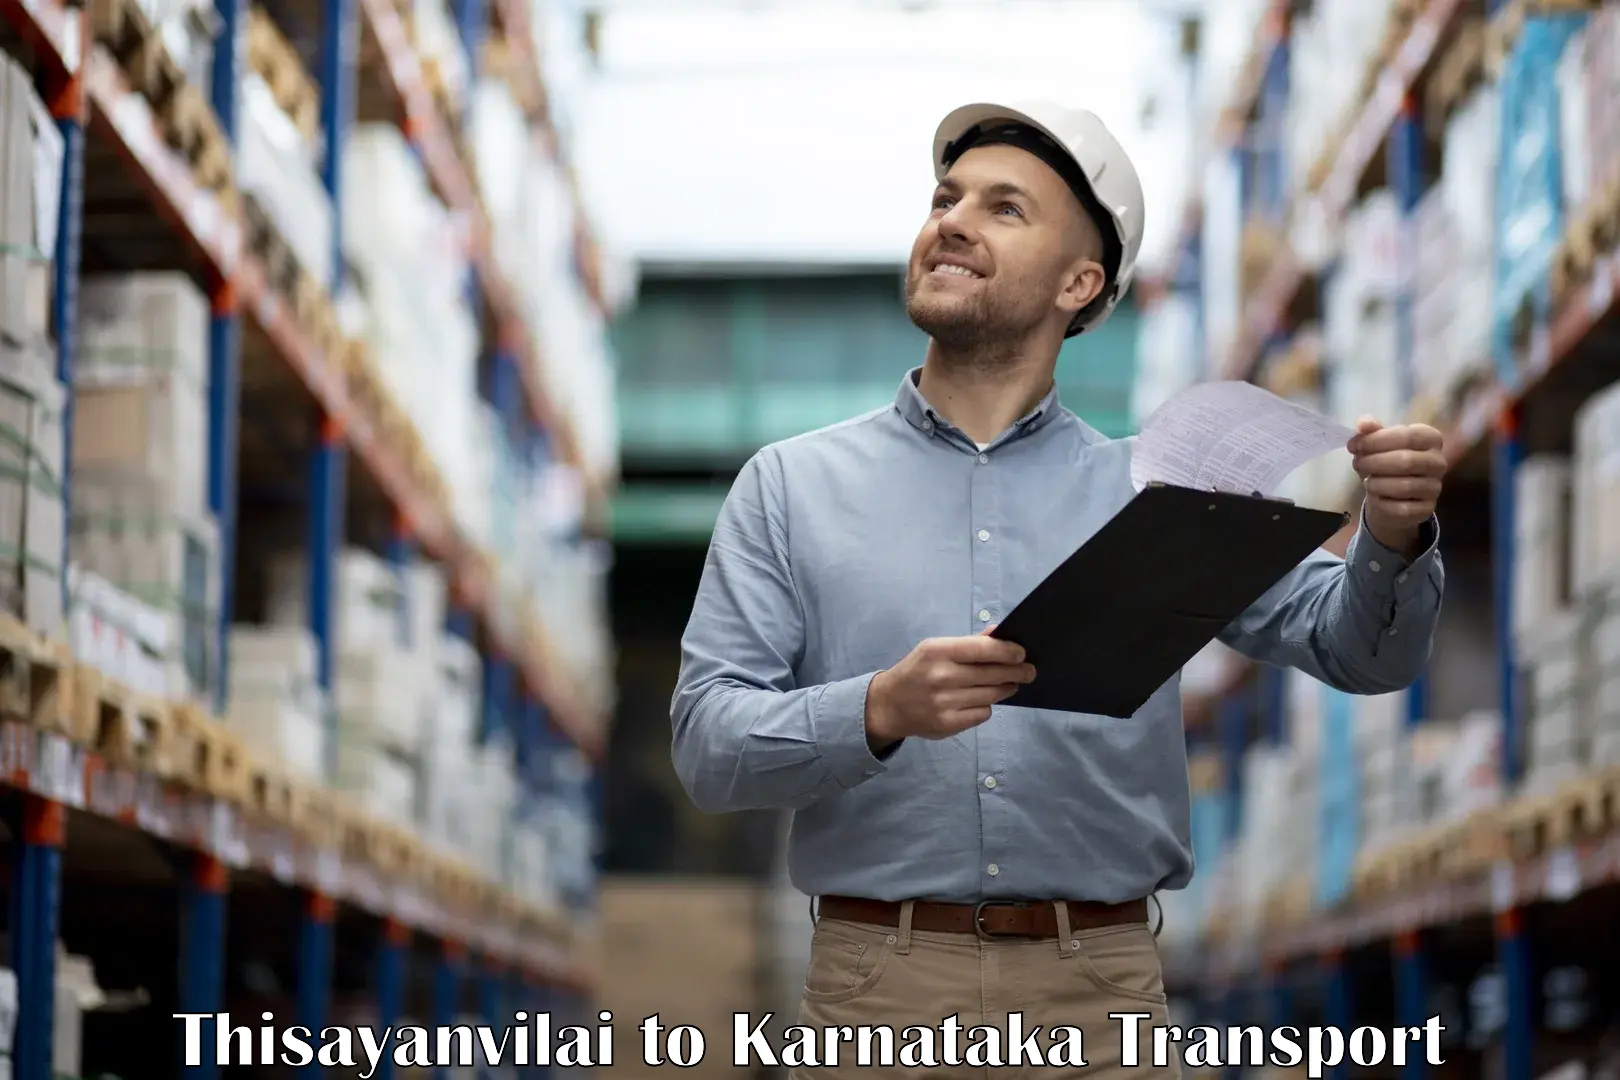 Commercial transport service Thisayanvilai to Channagiri